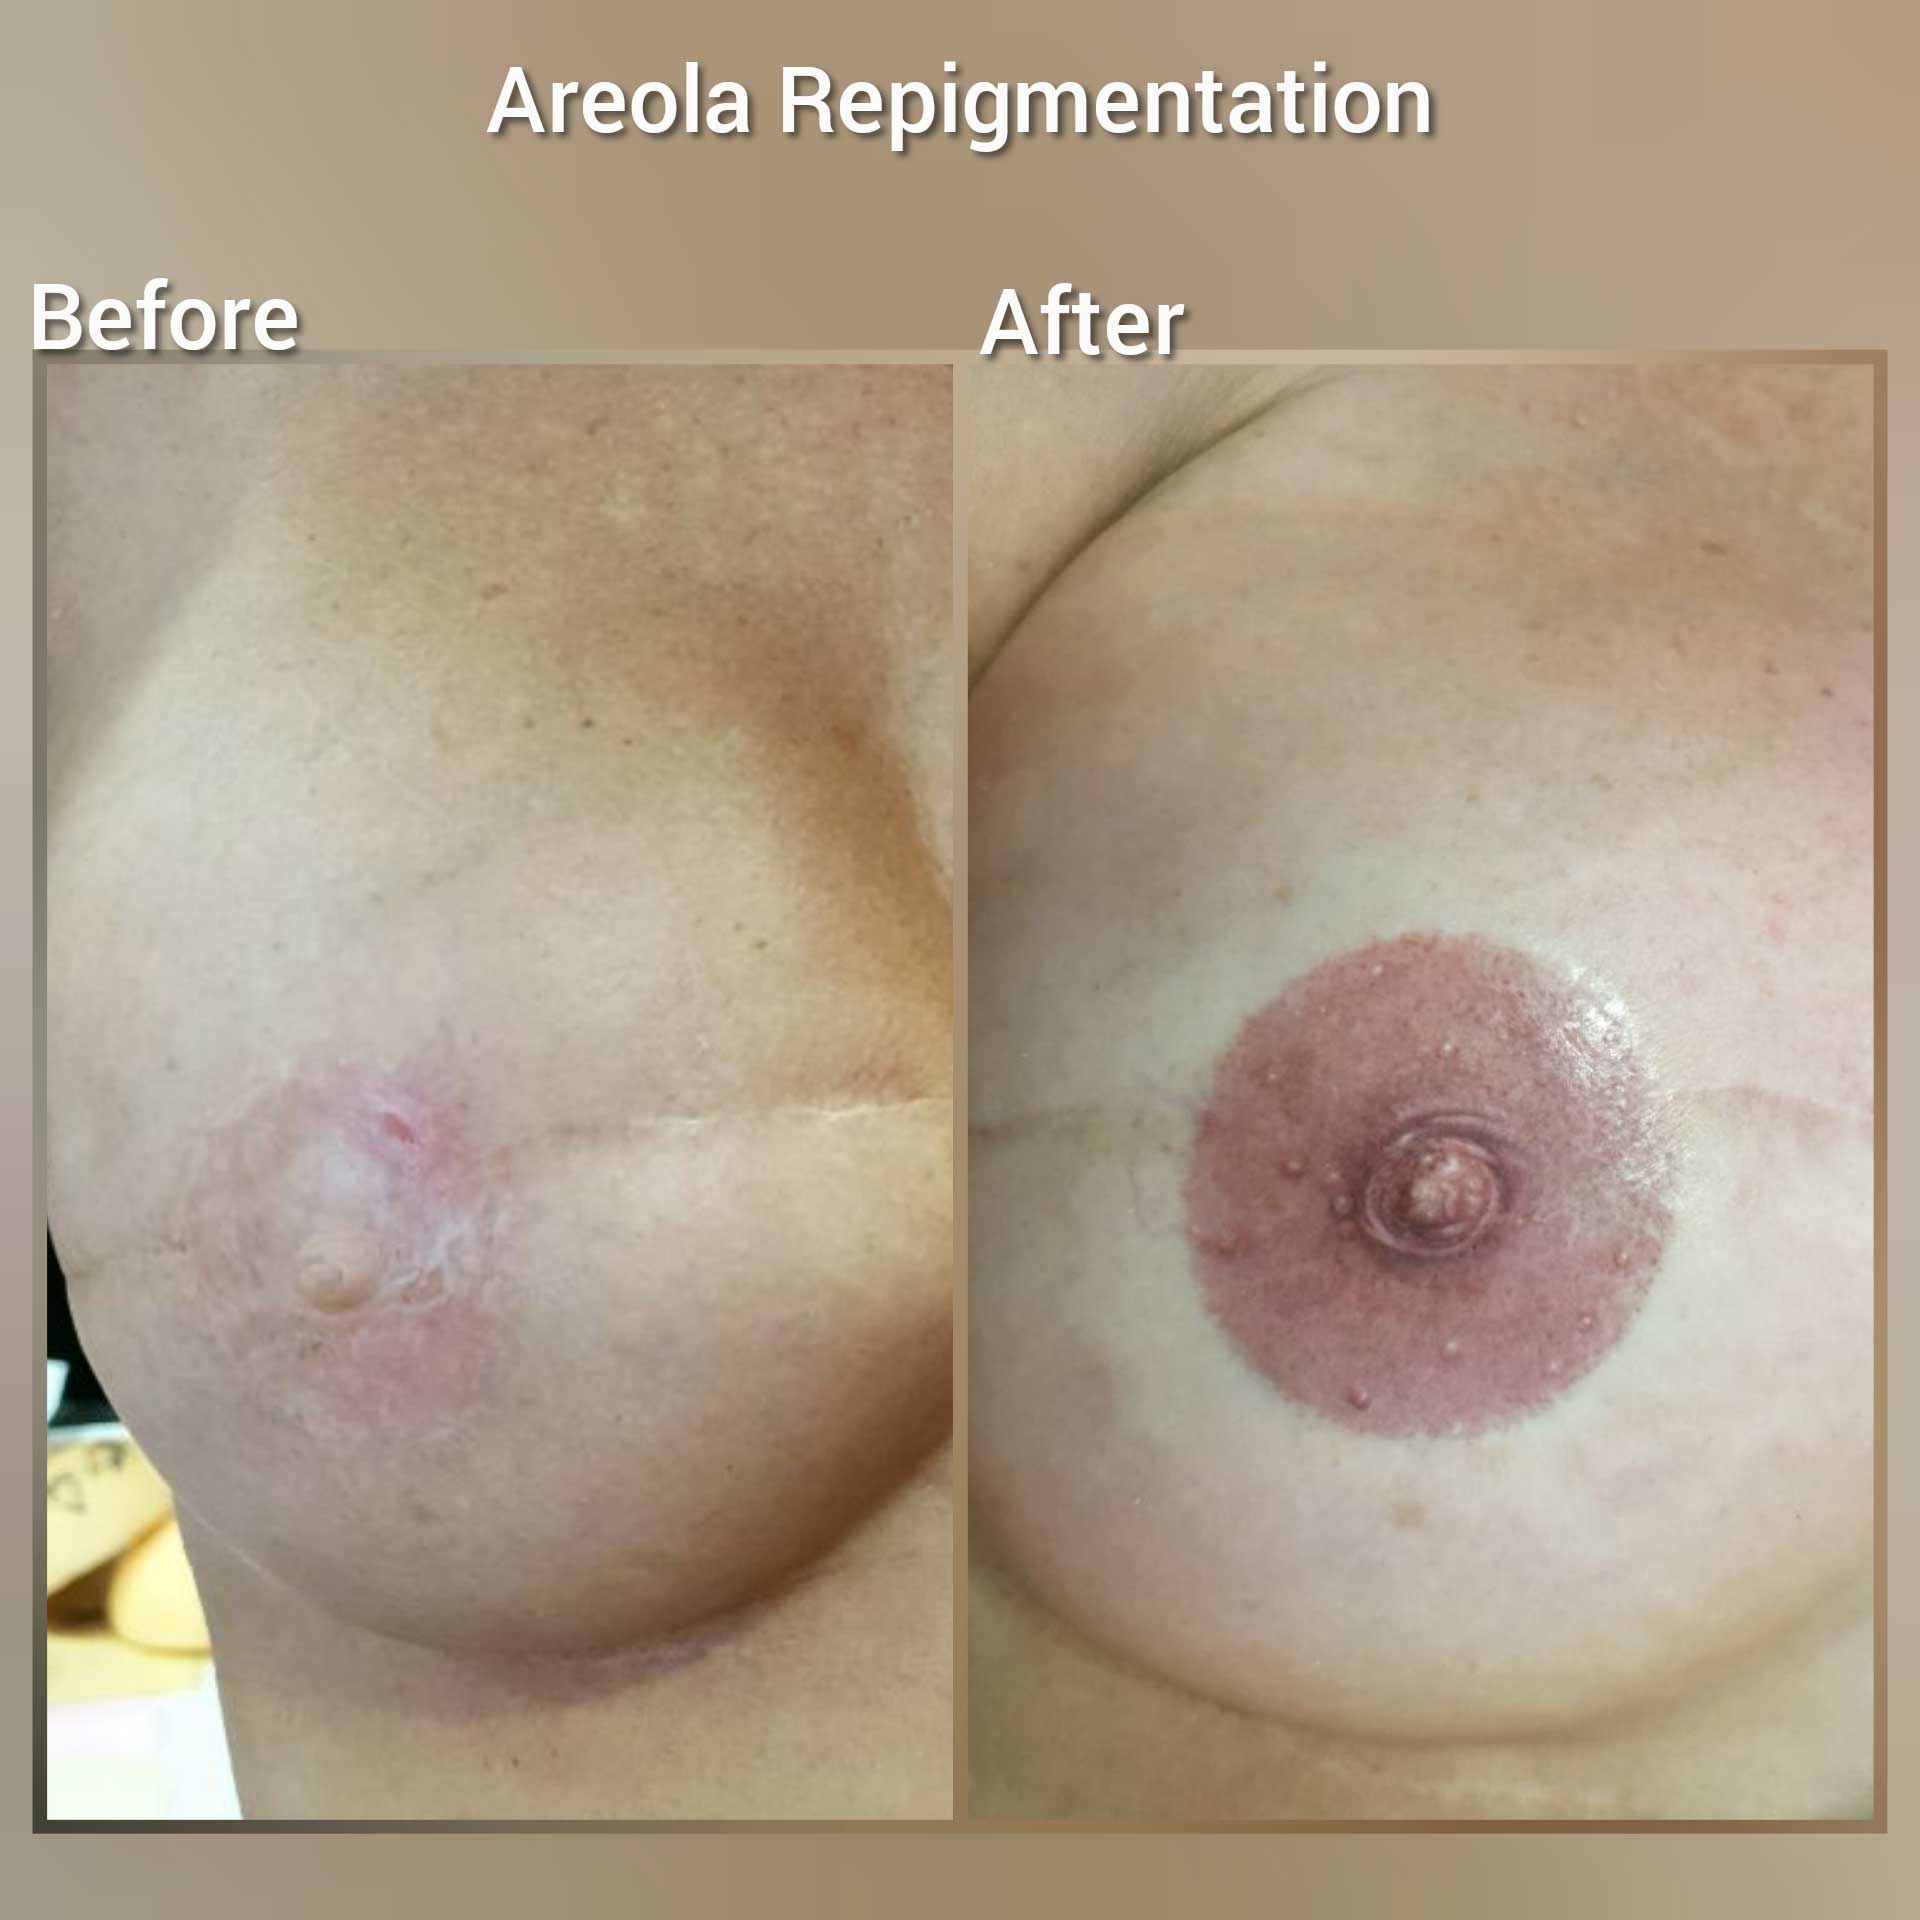 3D Areola Repigmentation,Medical Tattoo. Cosmetic and Mediical Tattoo by Dasha. Permanent makeup and reconstructive tattoo, scalp micro-pigmentation in Christchurch, New Zealand